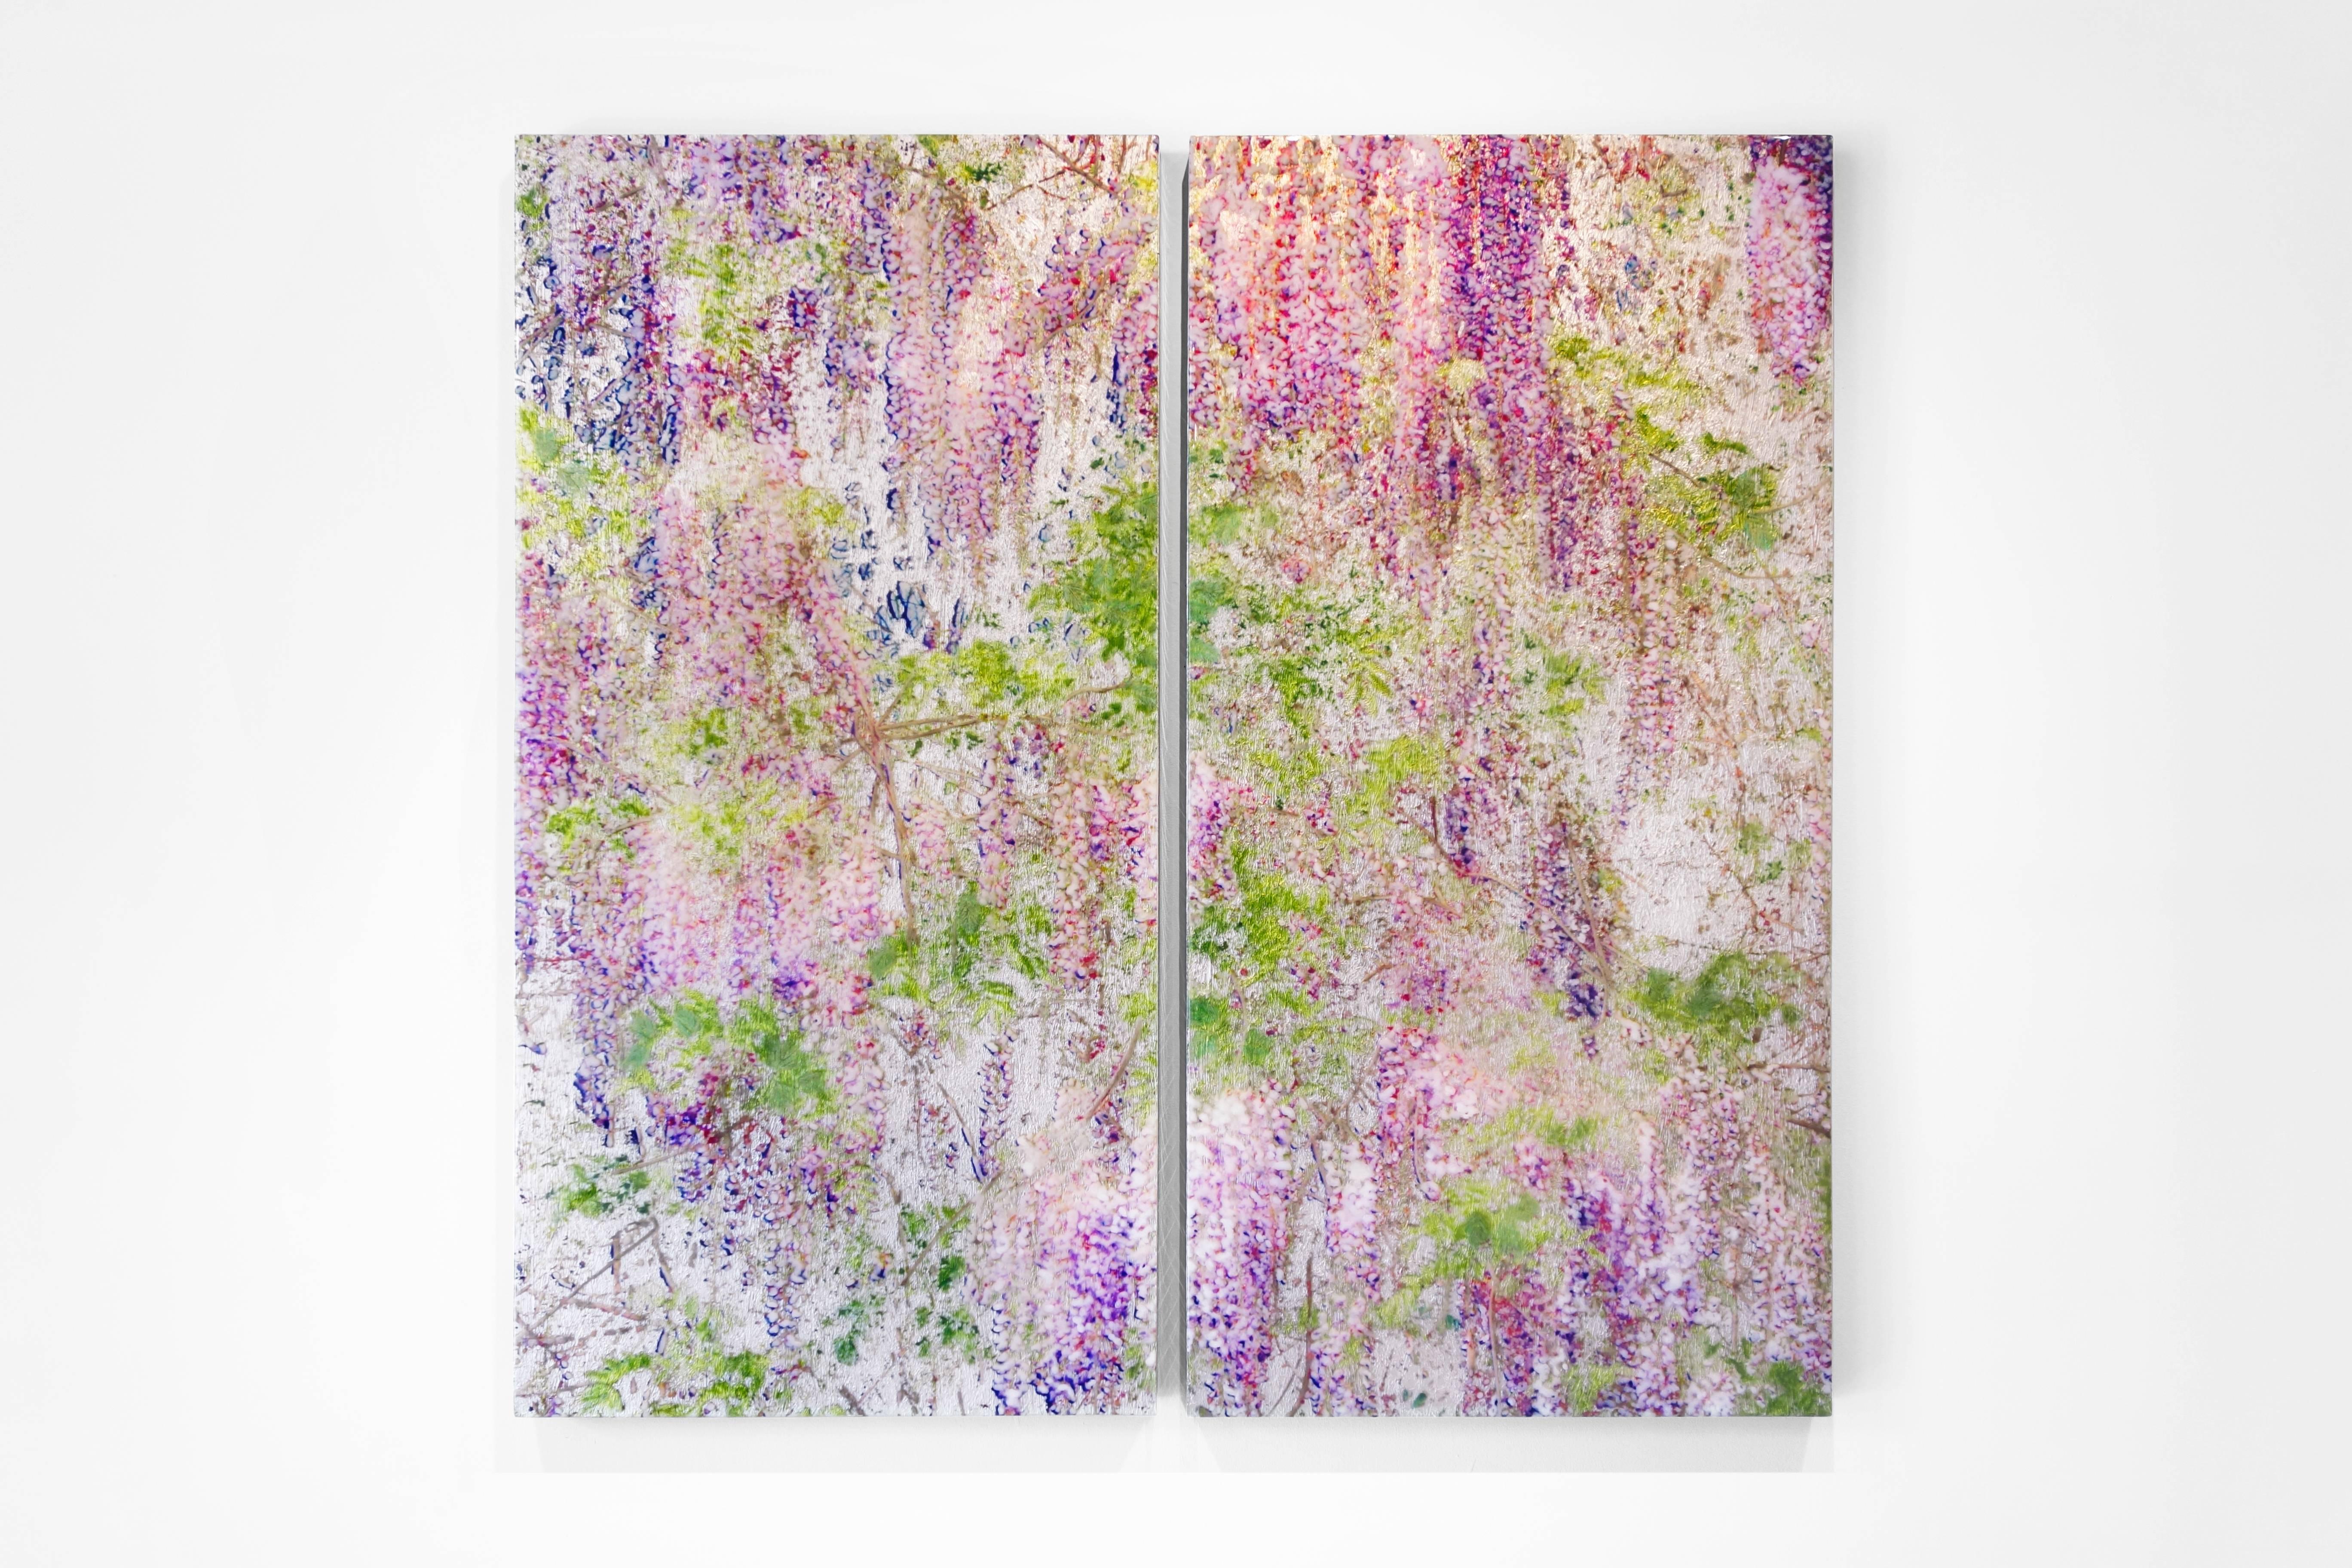 Springtime Reverie (Diptych) - Contemporary Mixed Media Art by Susan Goldsmith